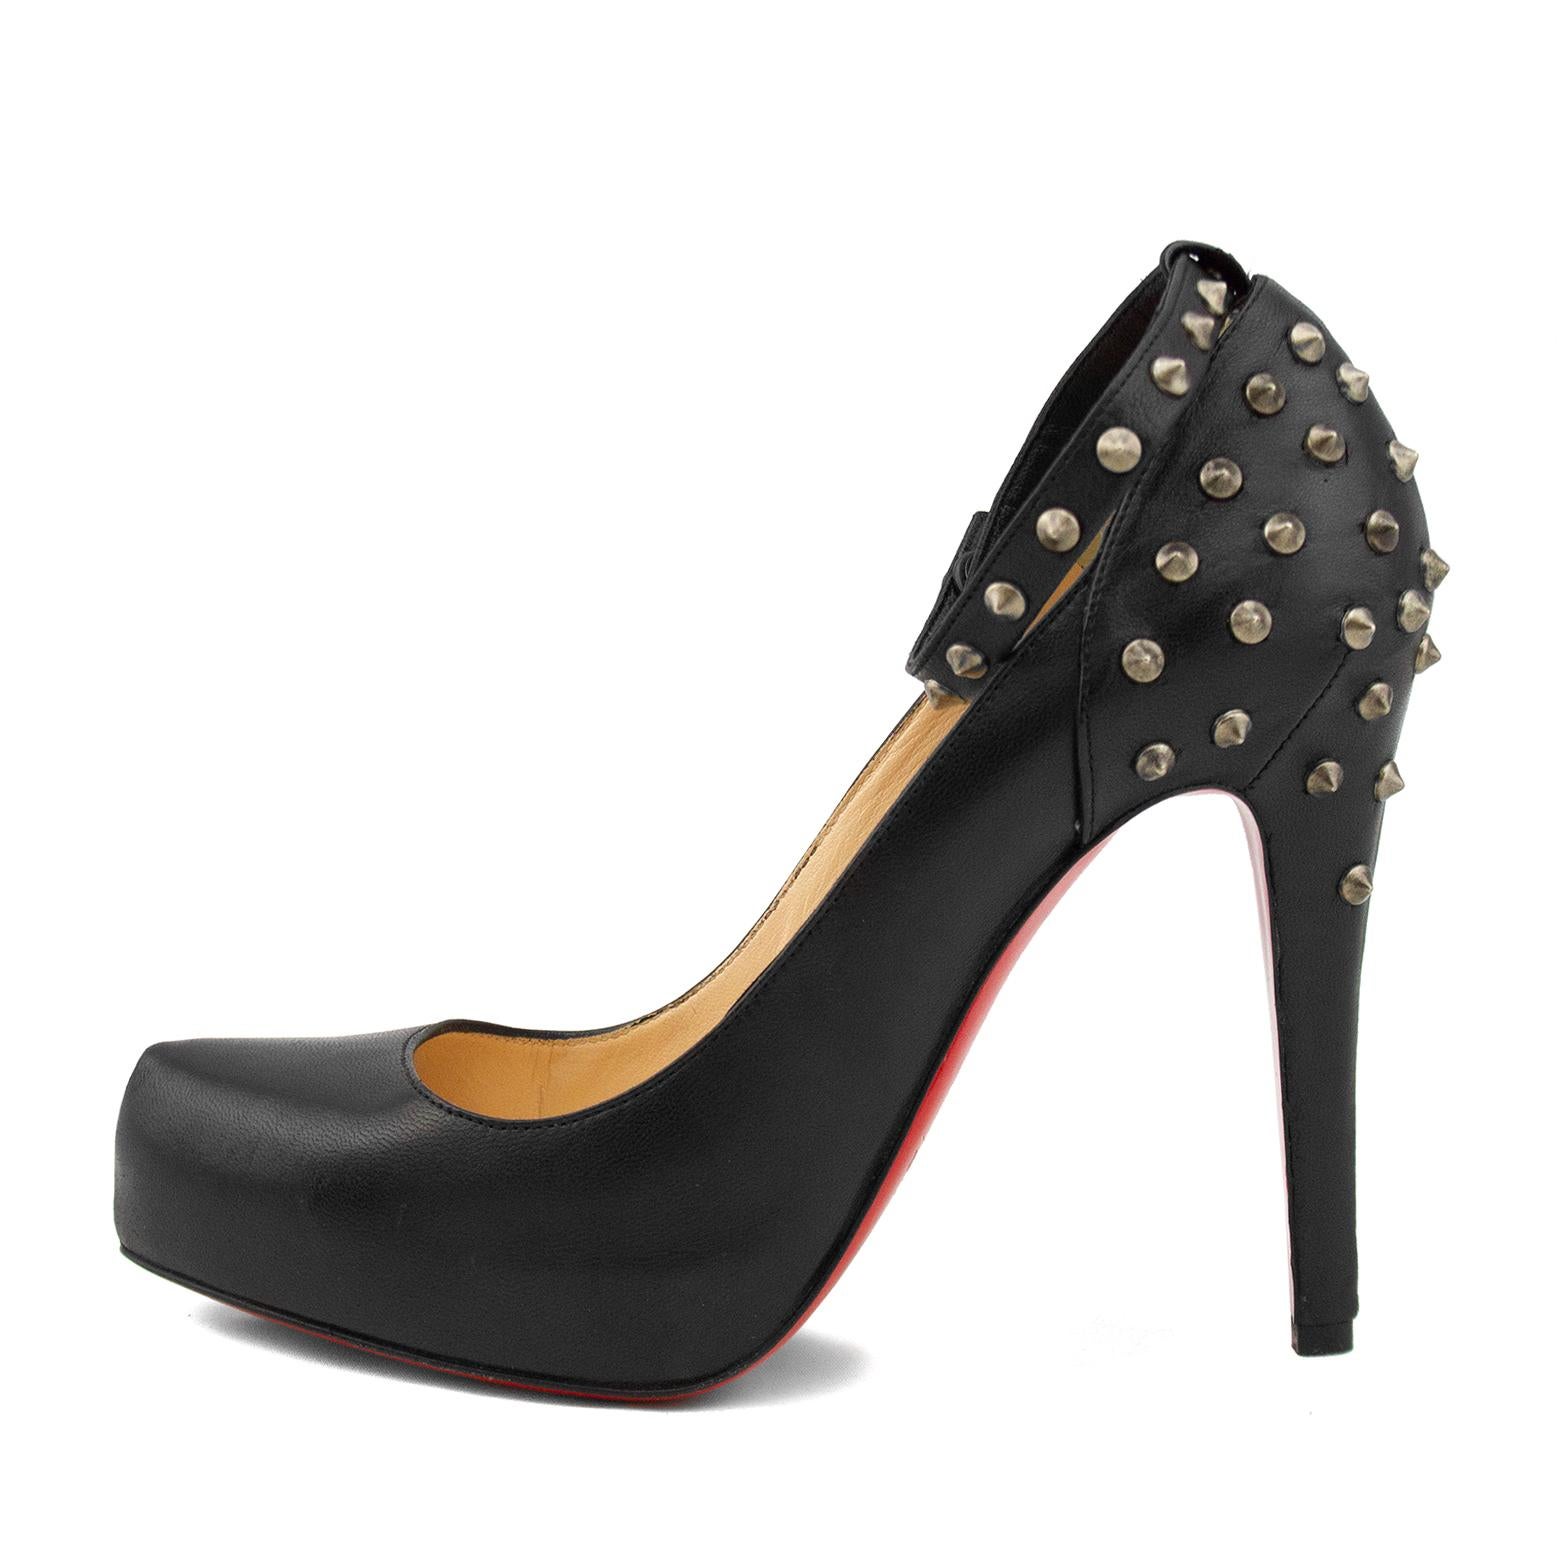 louboutin heels with studs